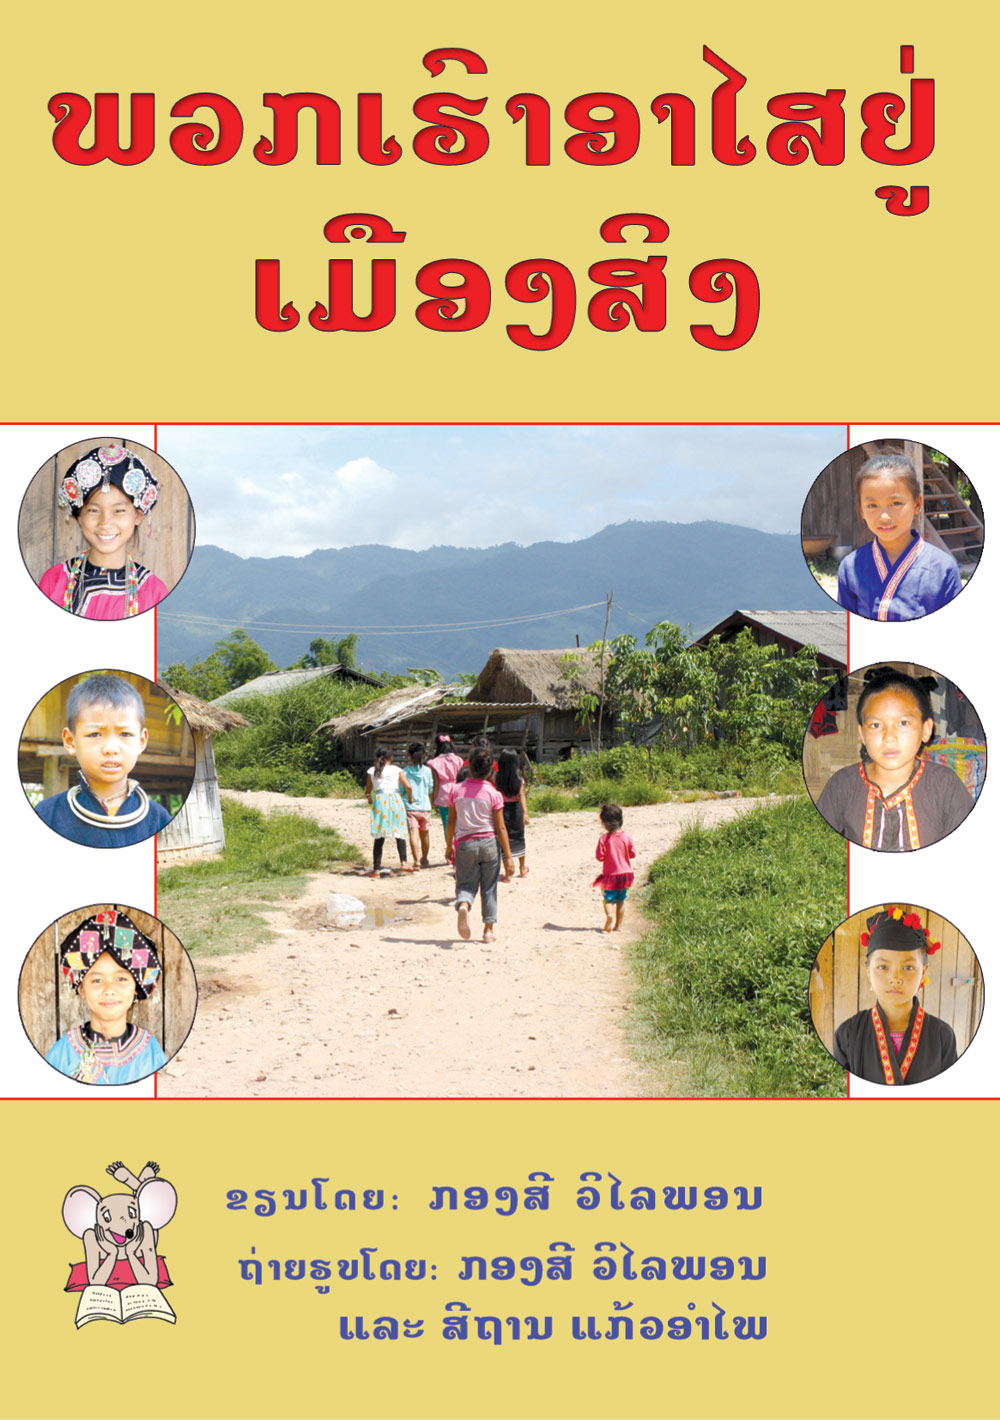 We Live in Muang Sing large book cover, published in Lao language